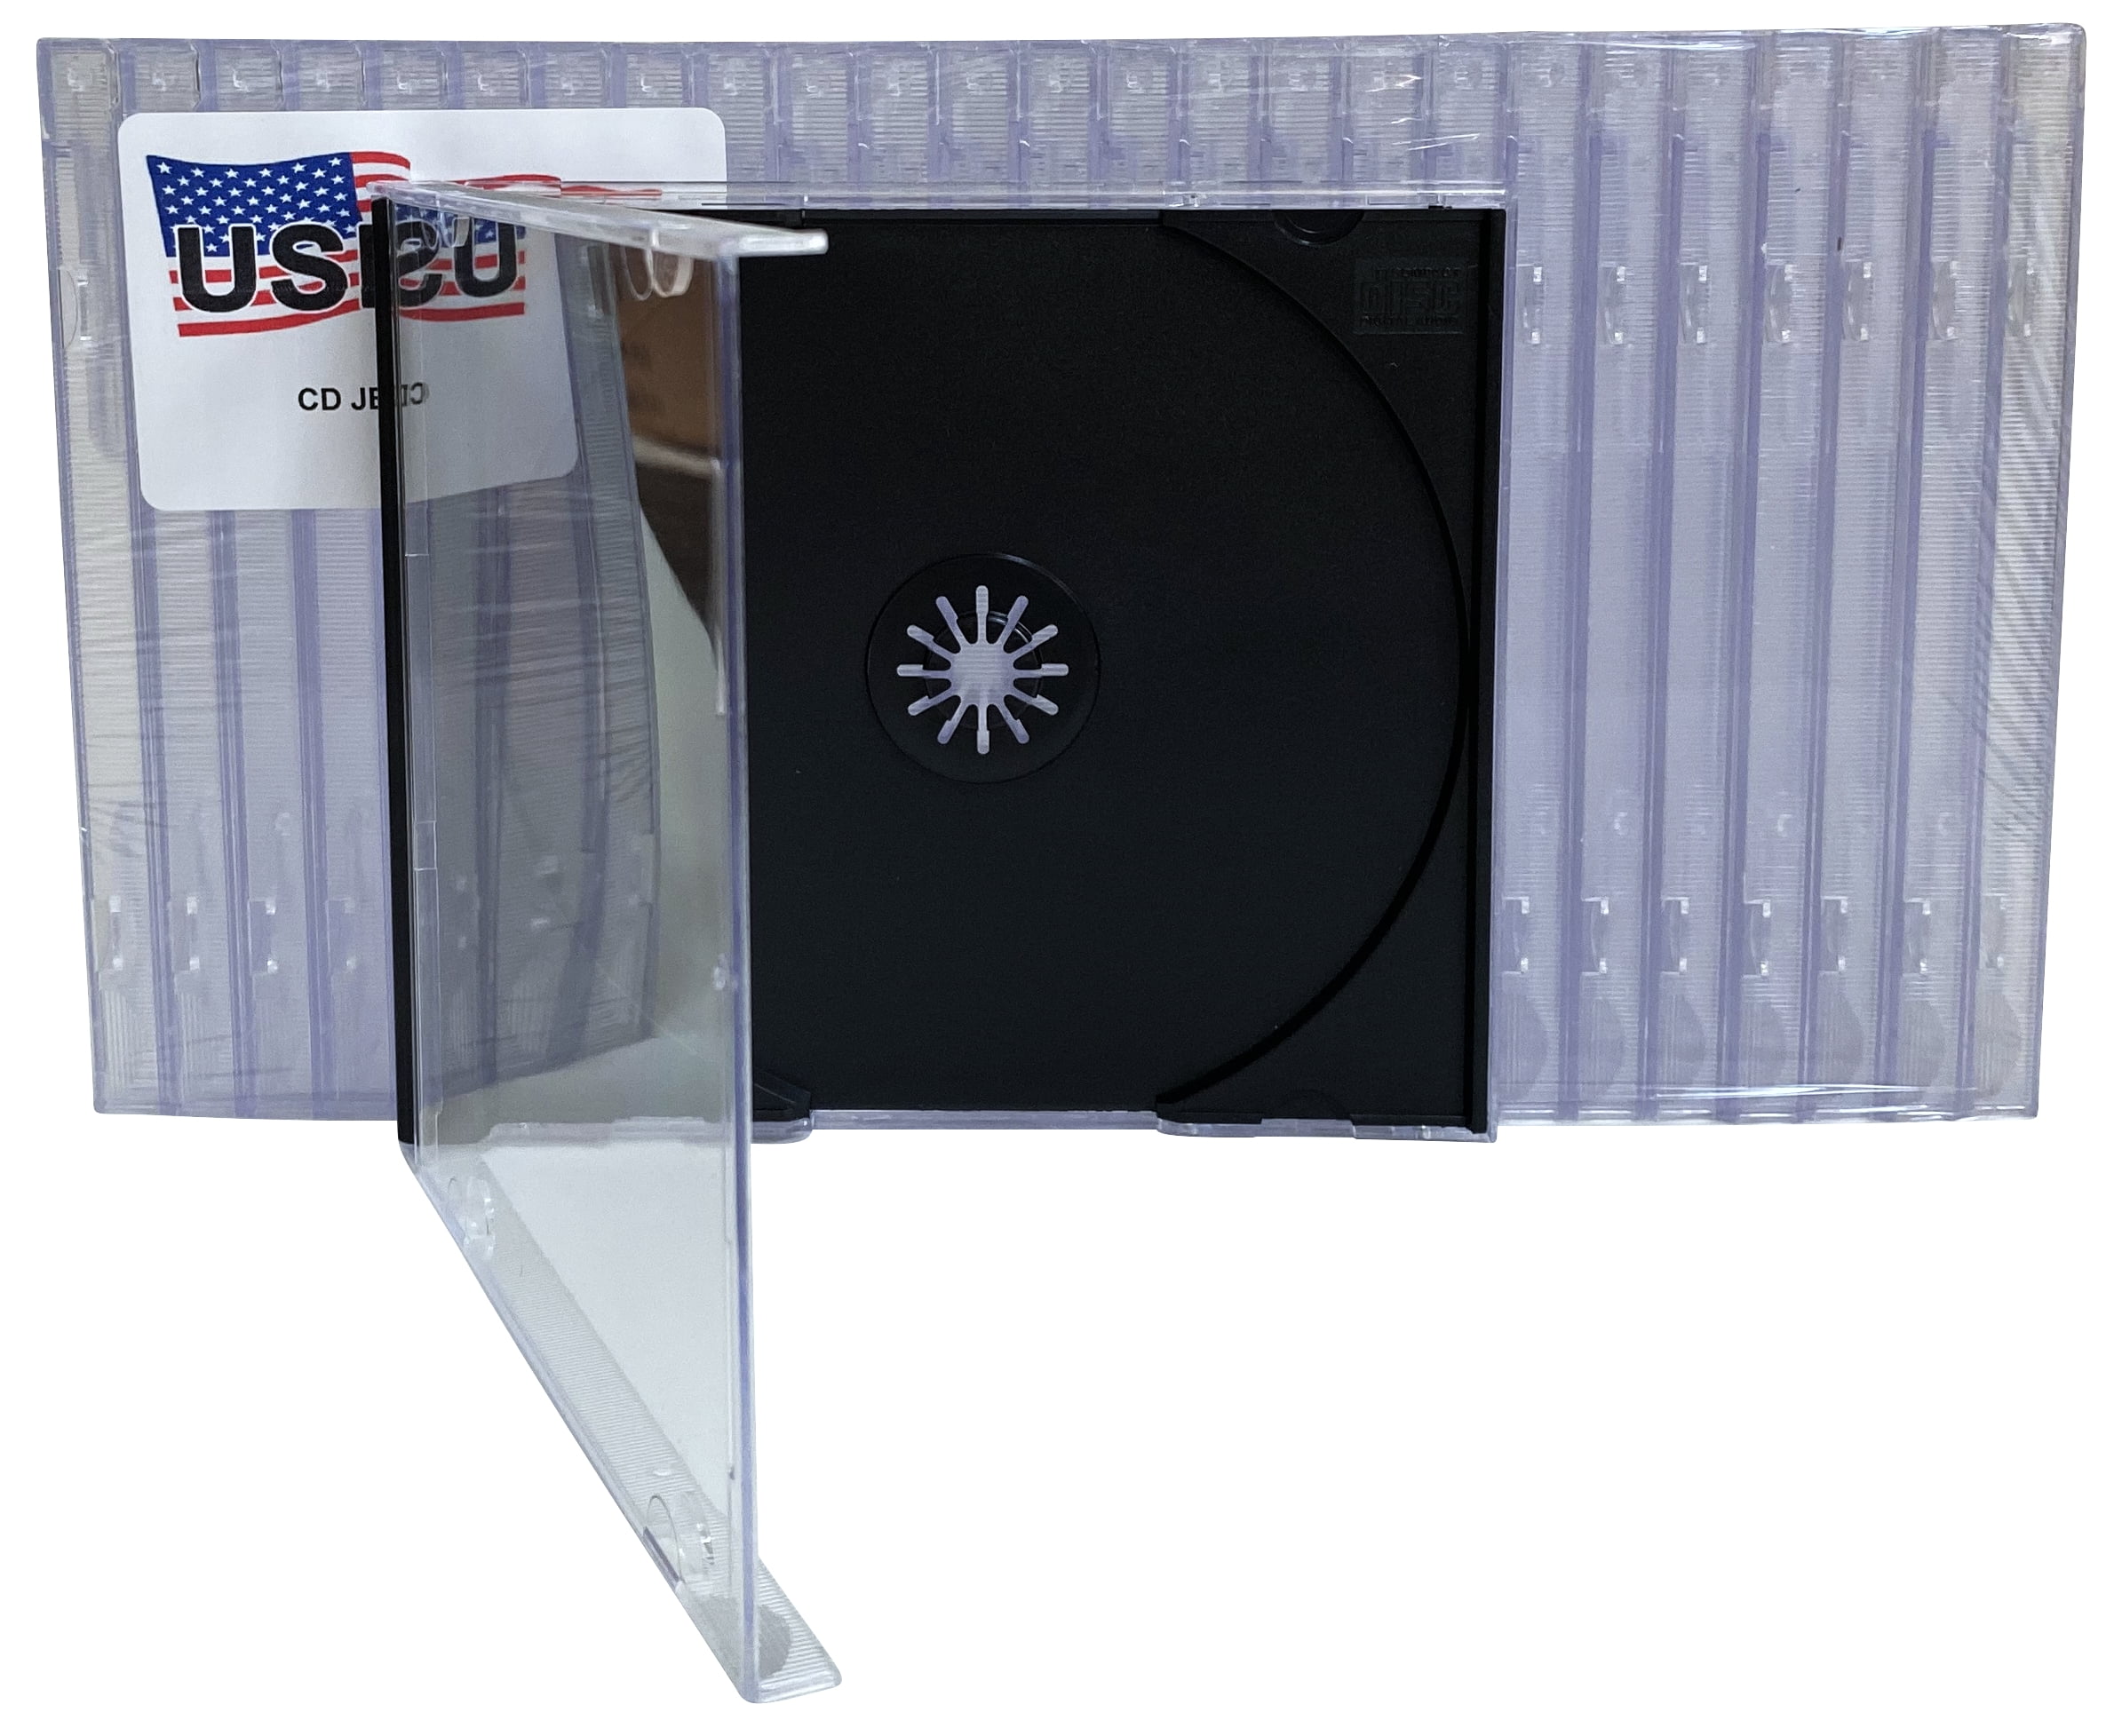 Double CD Maxi Jewel Case 10.4mm Spine Standard for 2 CDs with Clear Tray New 